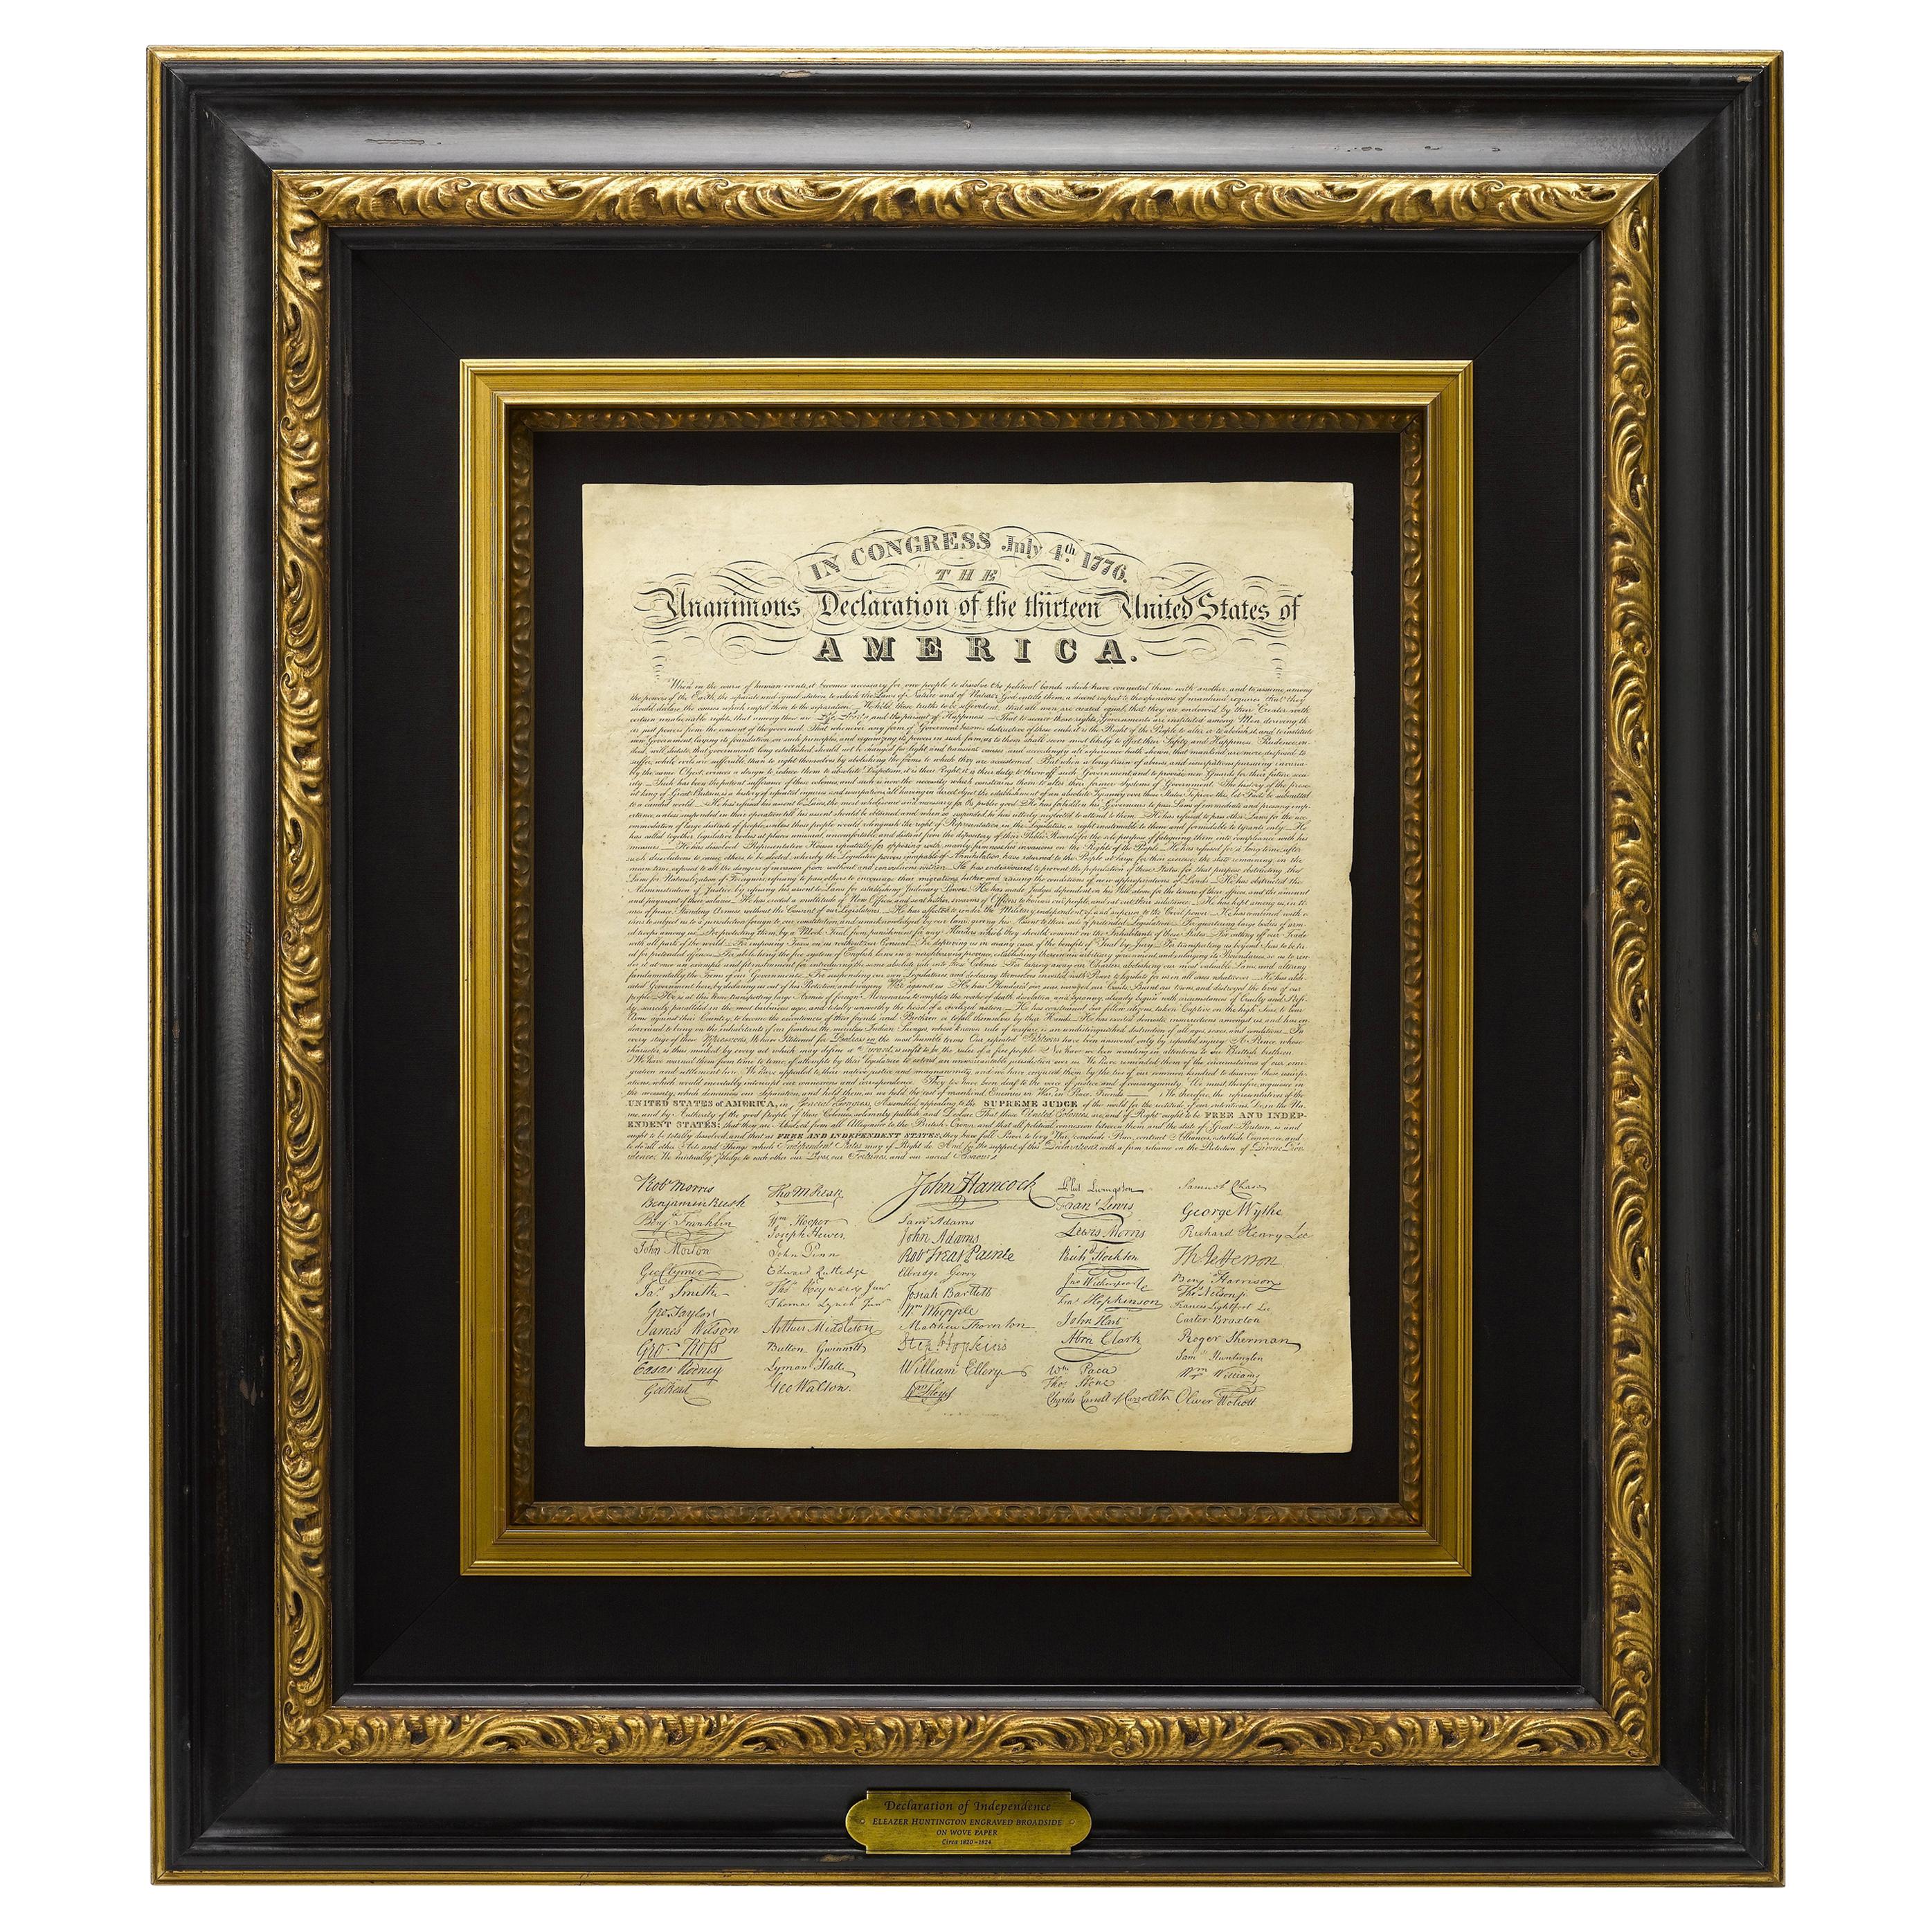 Declaration of Independence Broadside, Engraved by E. Huntington, circa 1820s